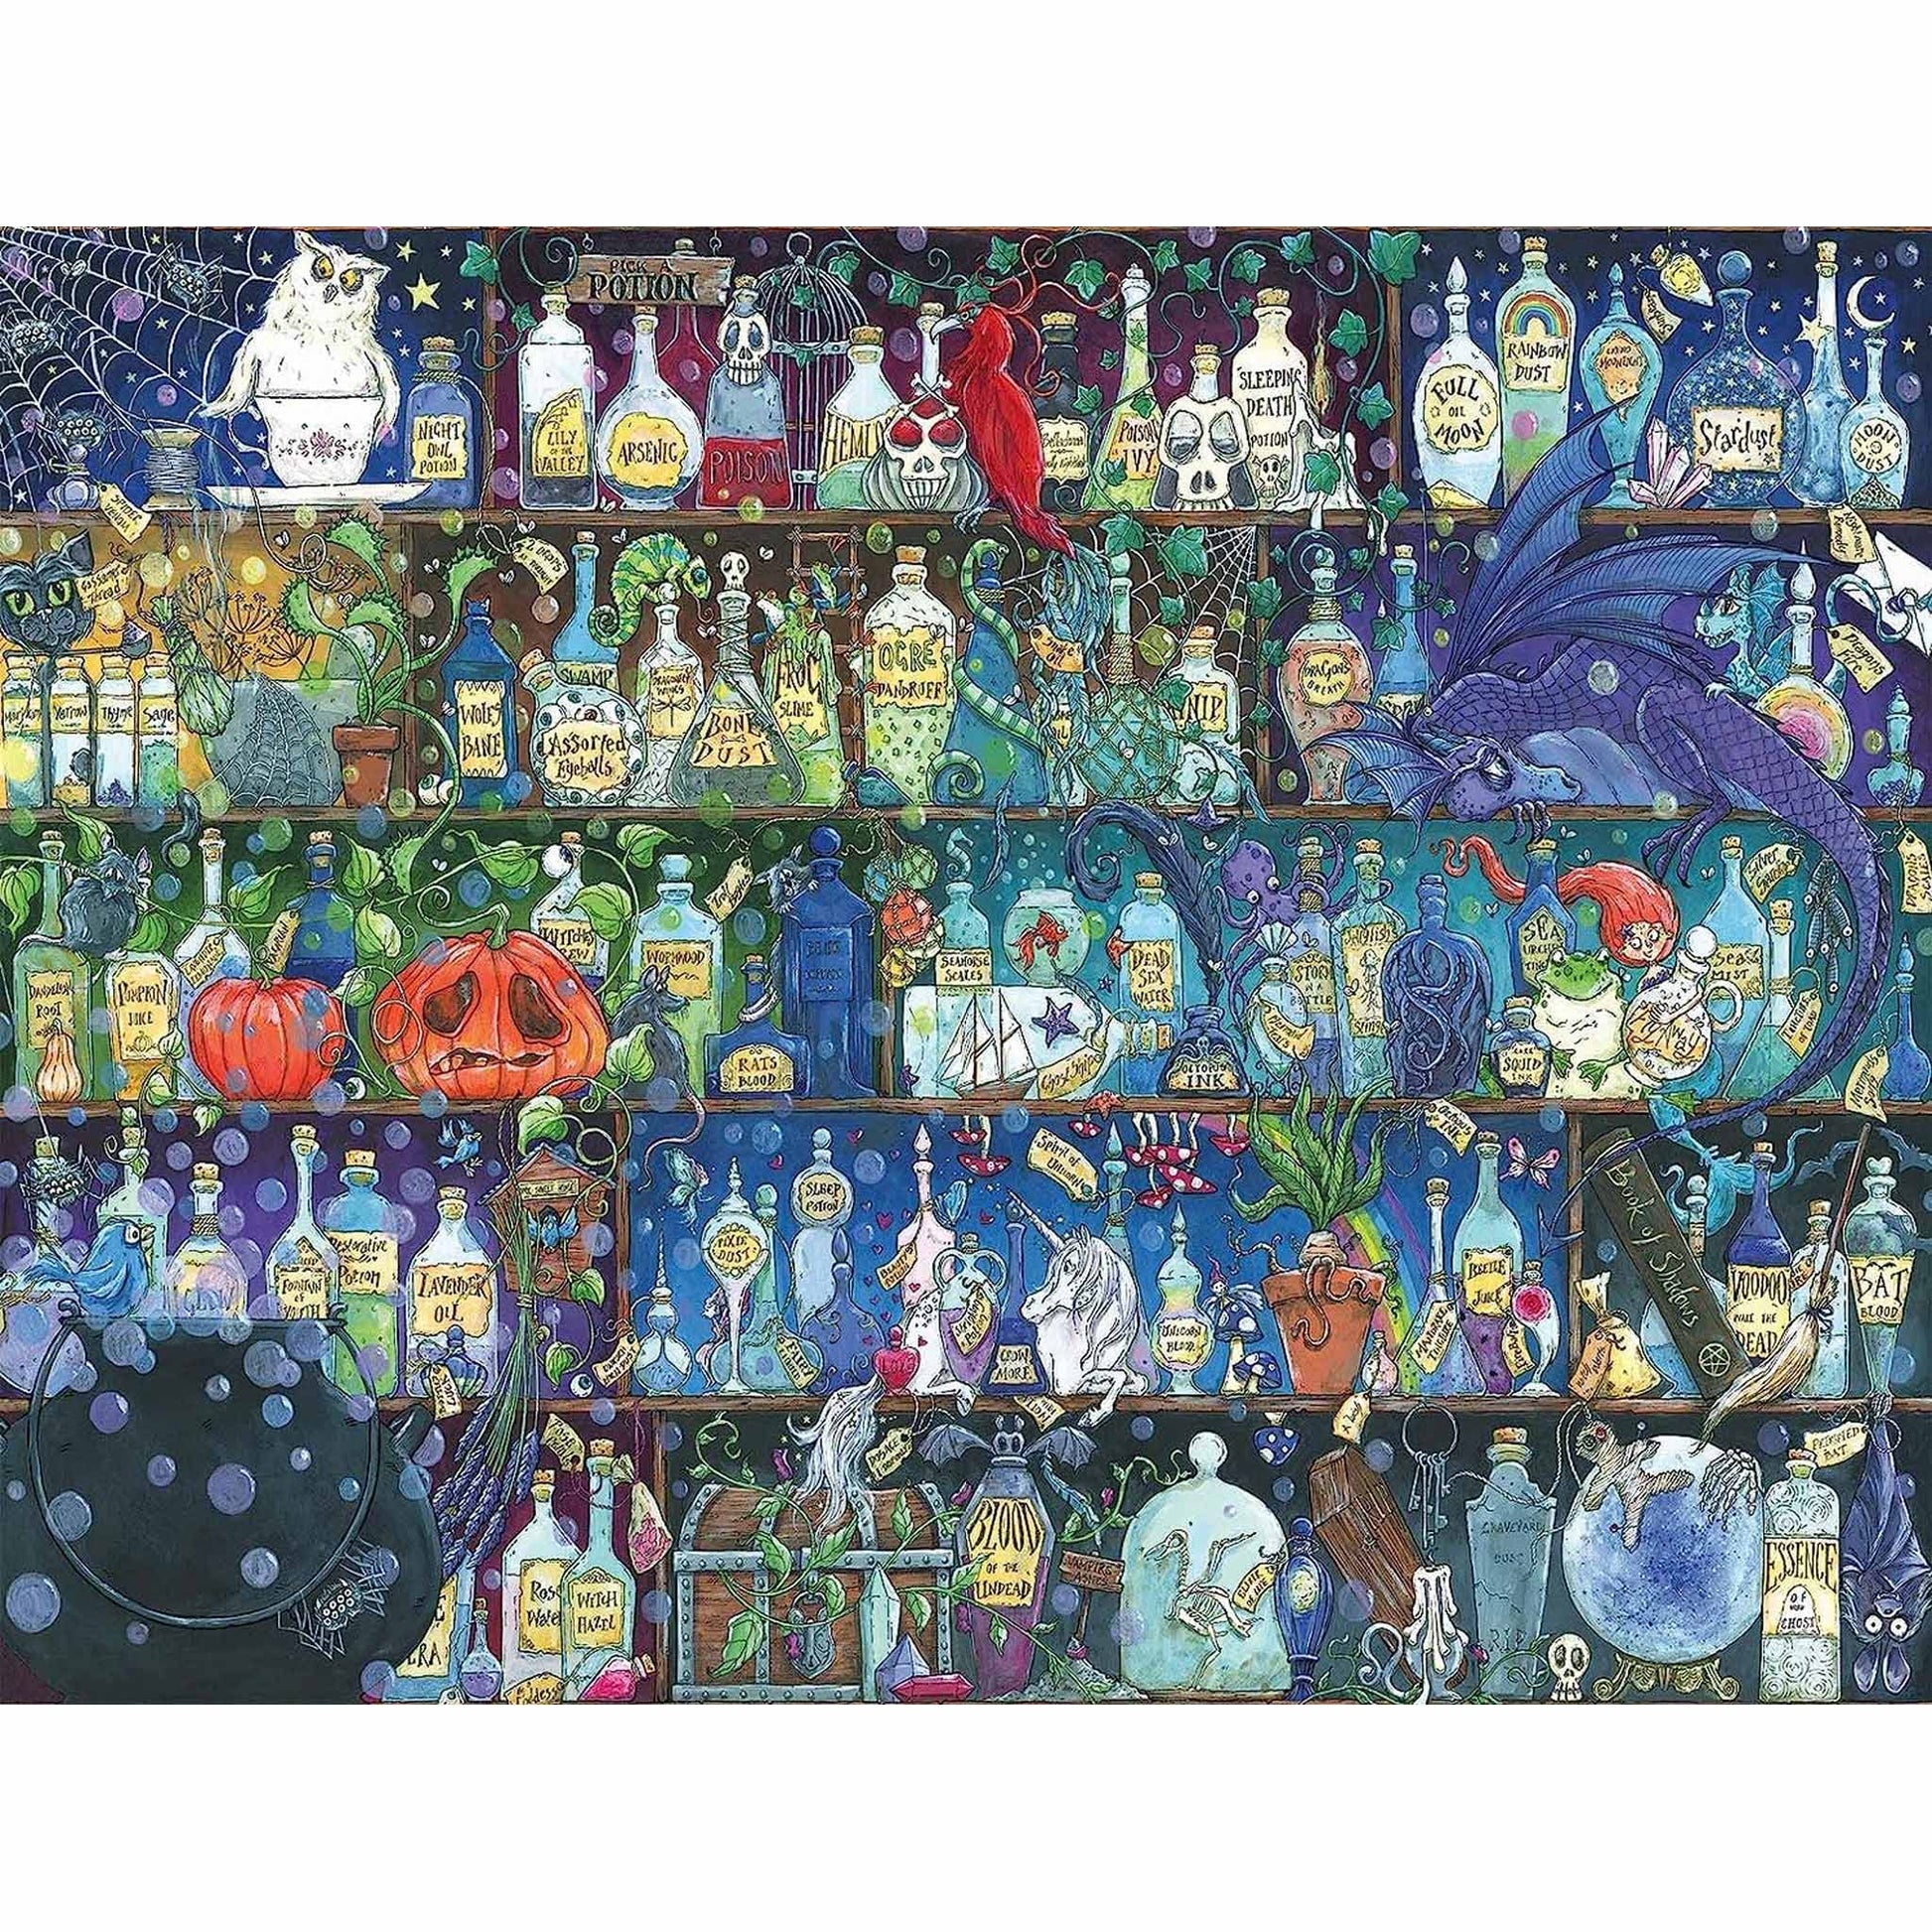 Image of Poisons and Potions Ravensburger puzzle.